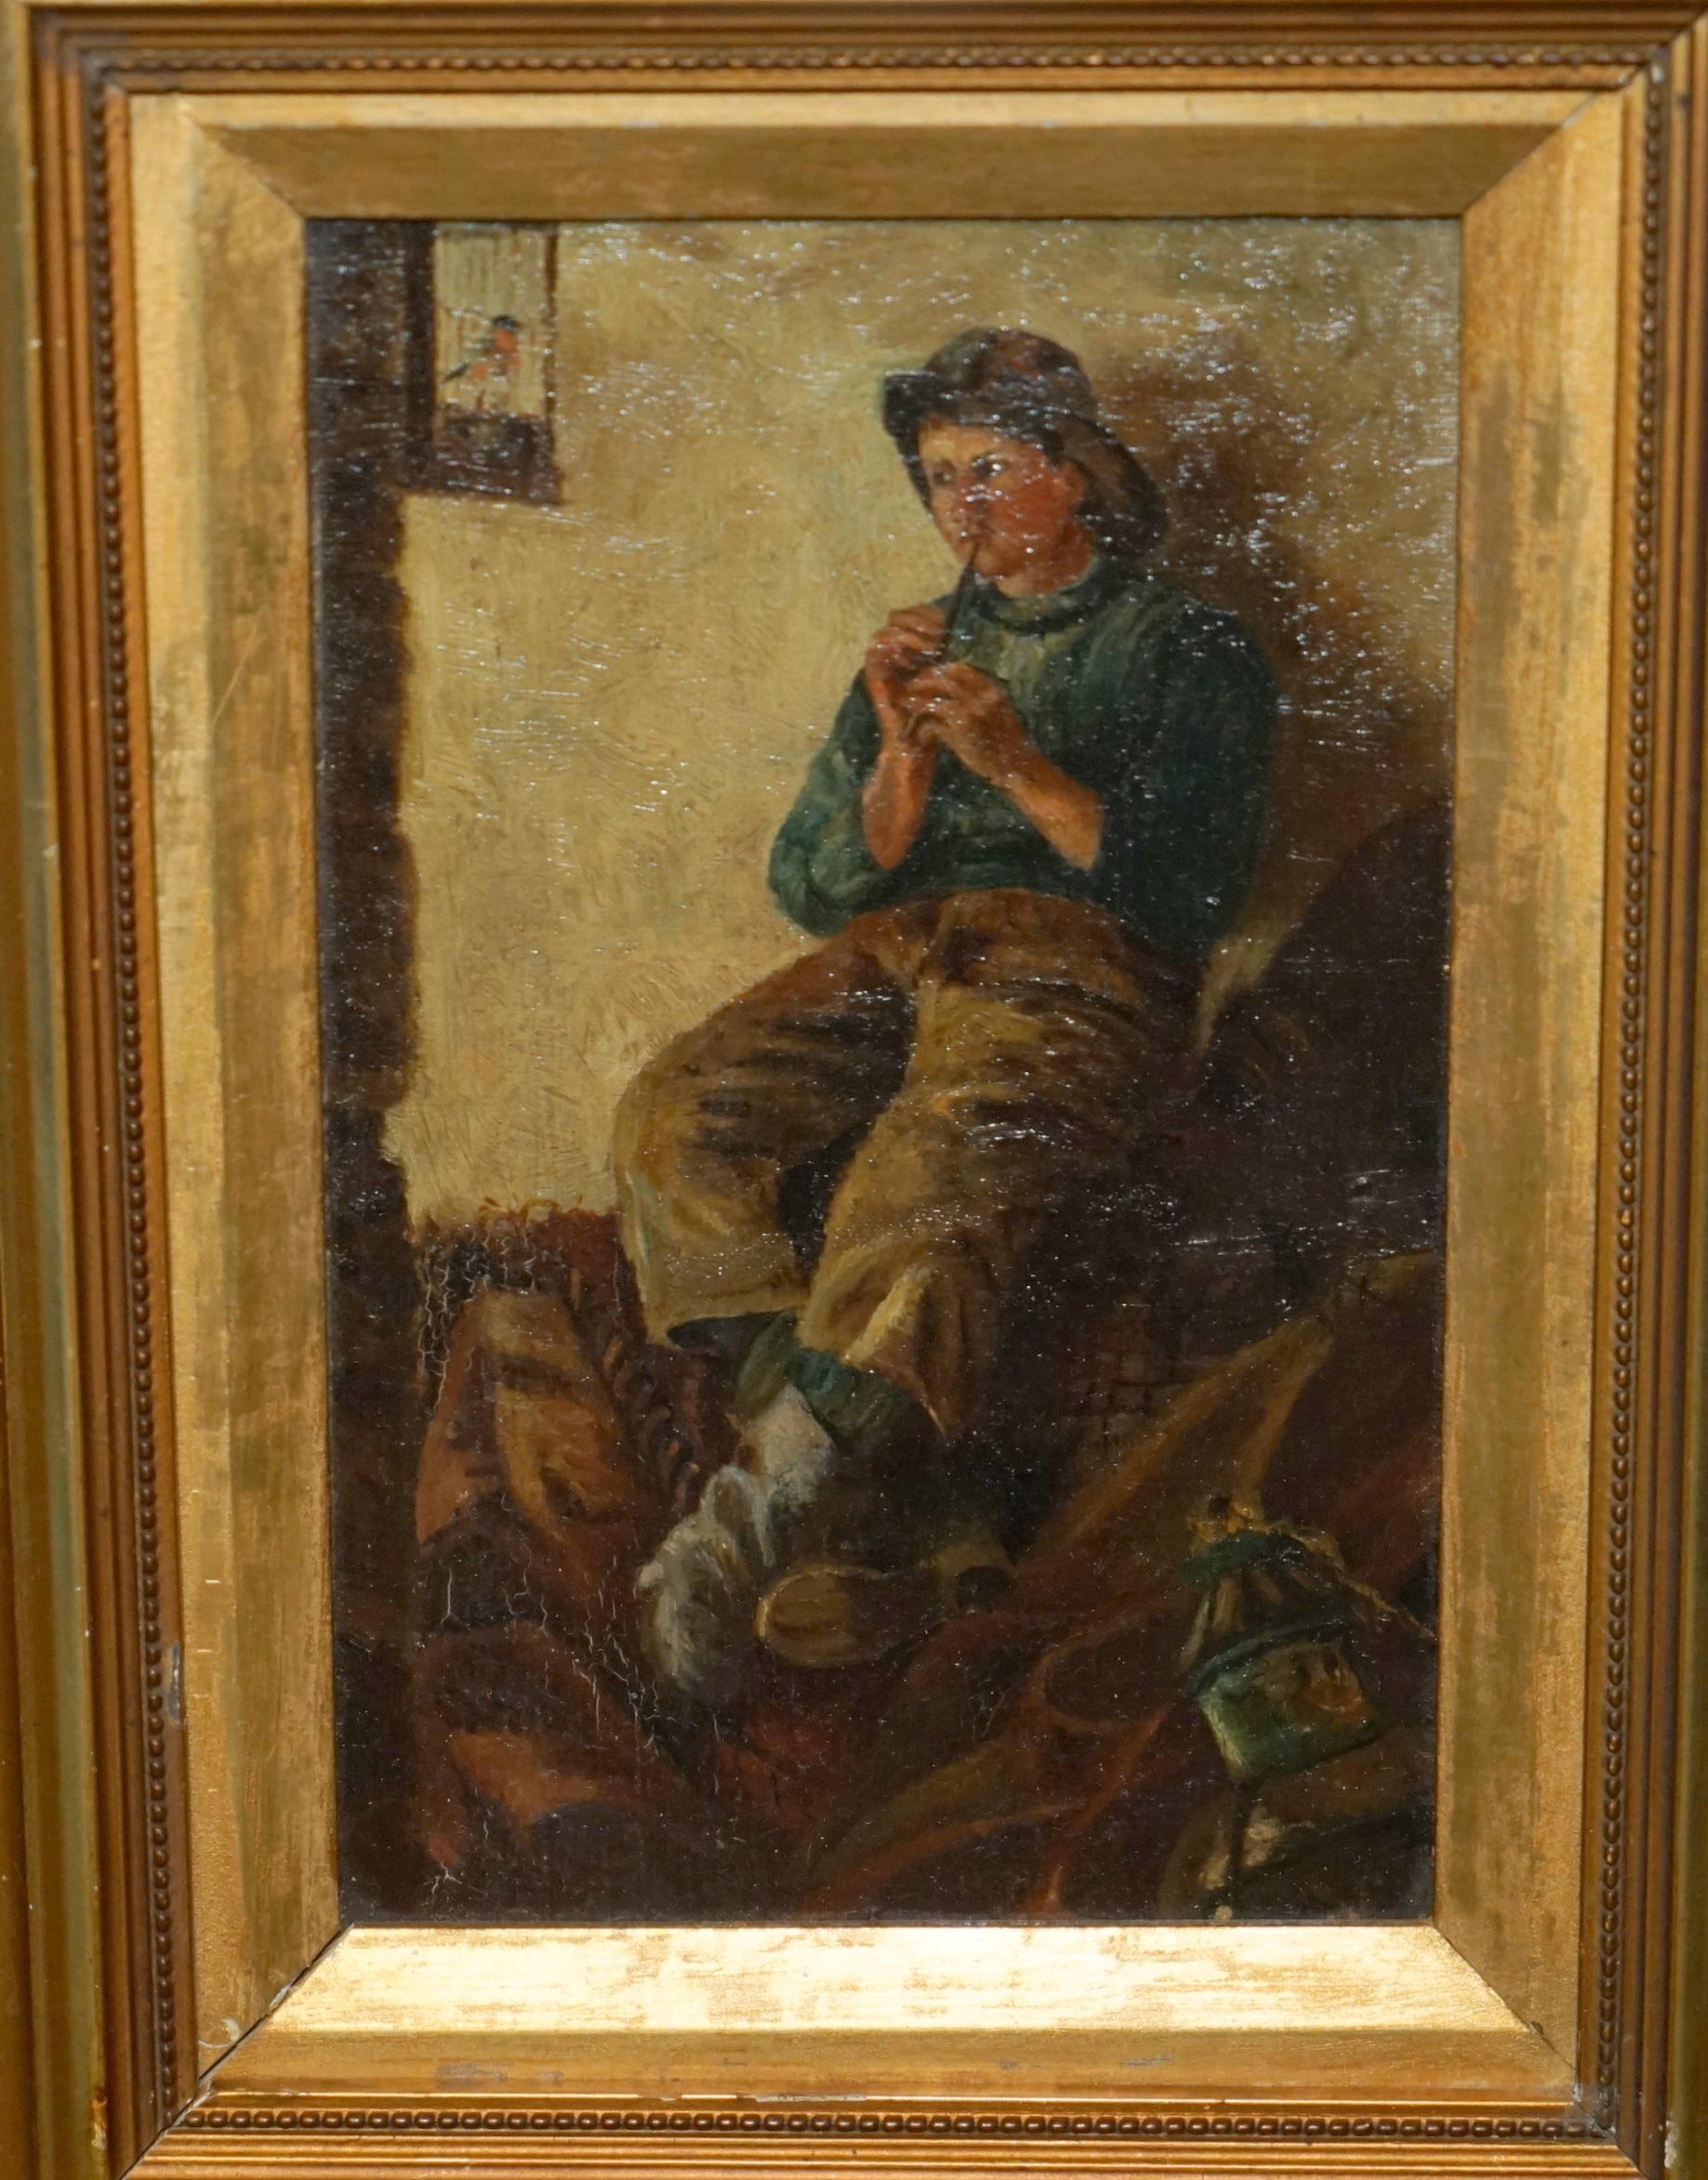 SUBLIME ANTIQUE ViCTORIAN OIL PAINTING OF A YOUNG BOY (FISHERMAN) PLAYING A PIPE (Englisch) im Angebot